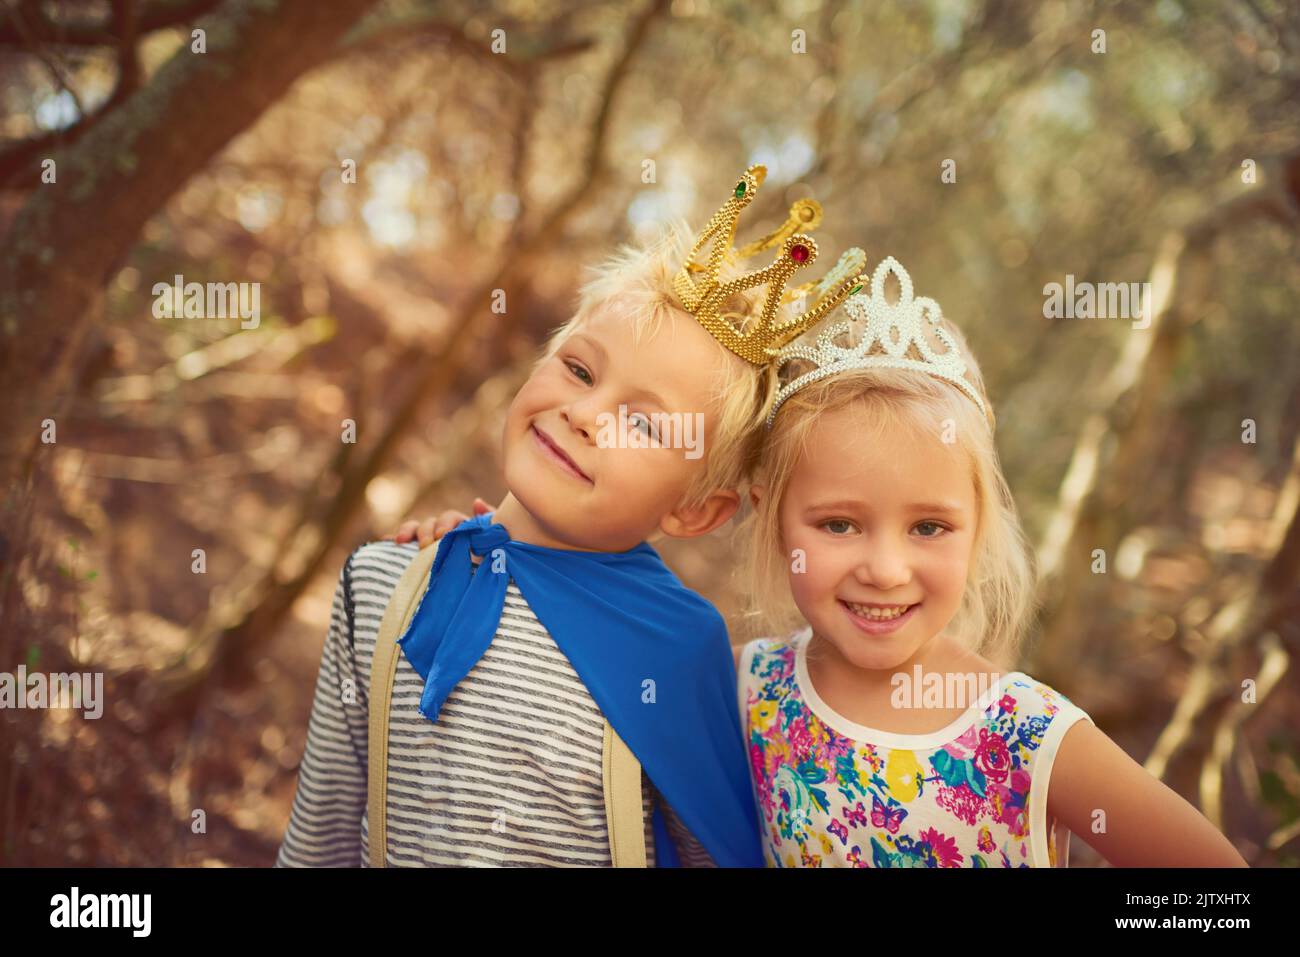 The royal siblings. Portrait of two little children playing together outdoors. Stock Photo